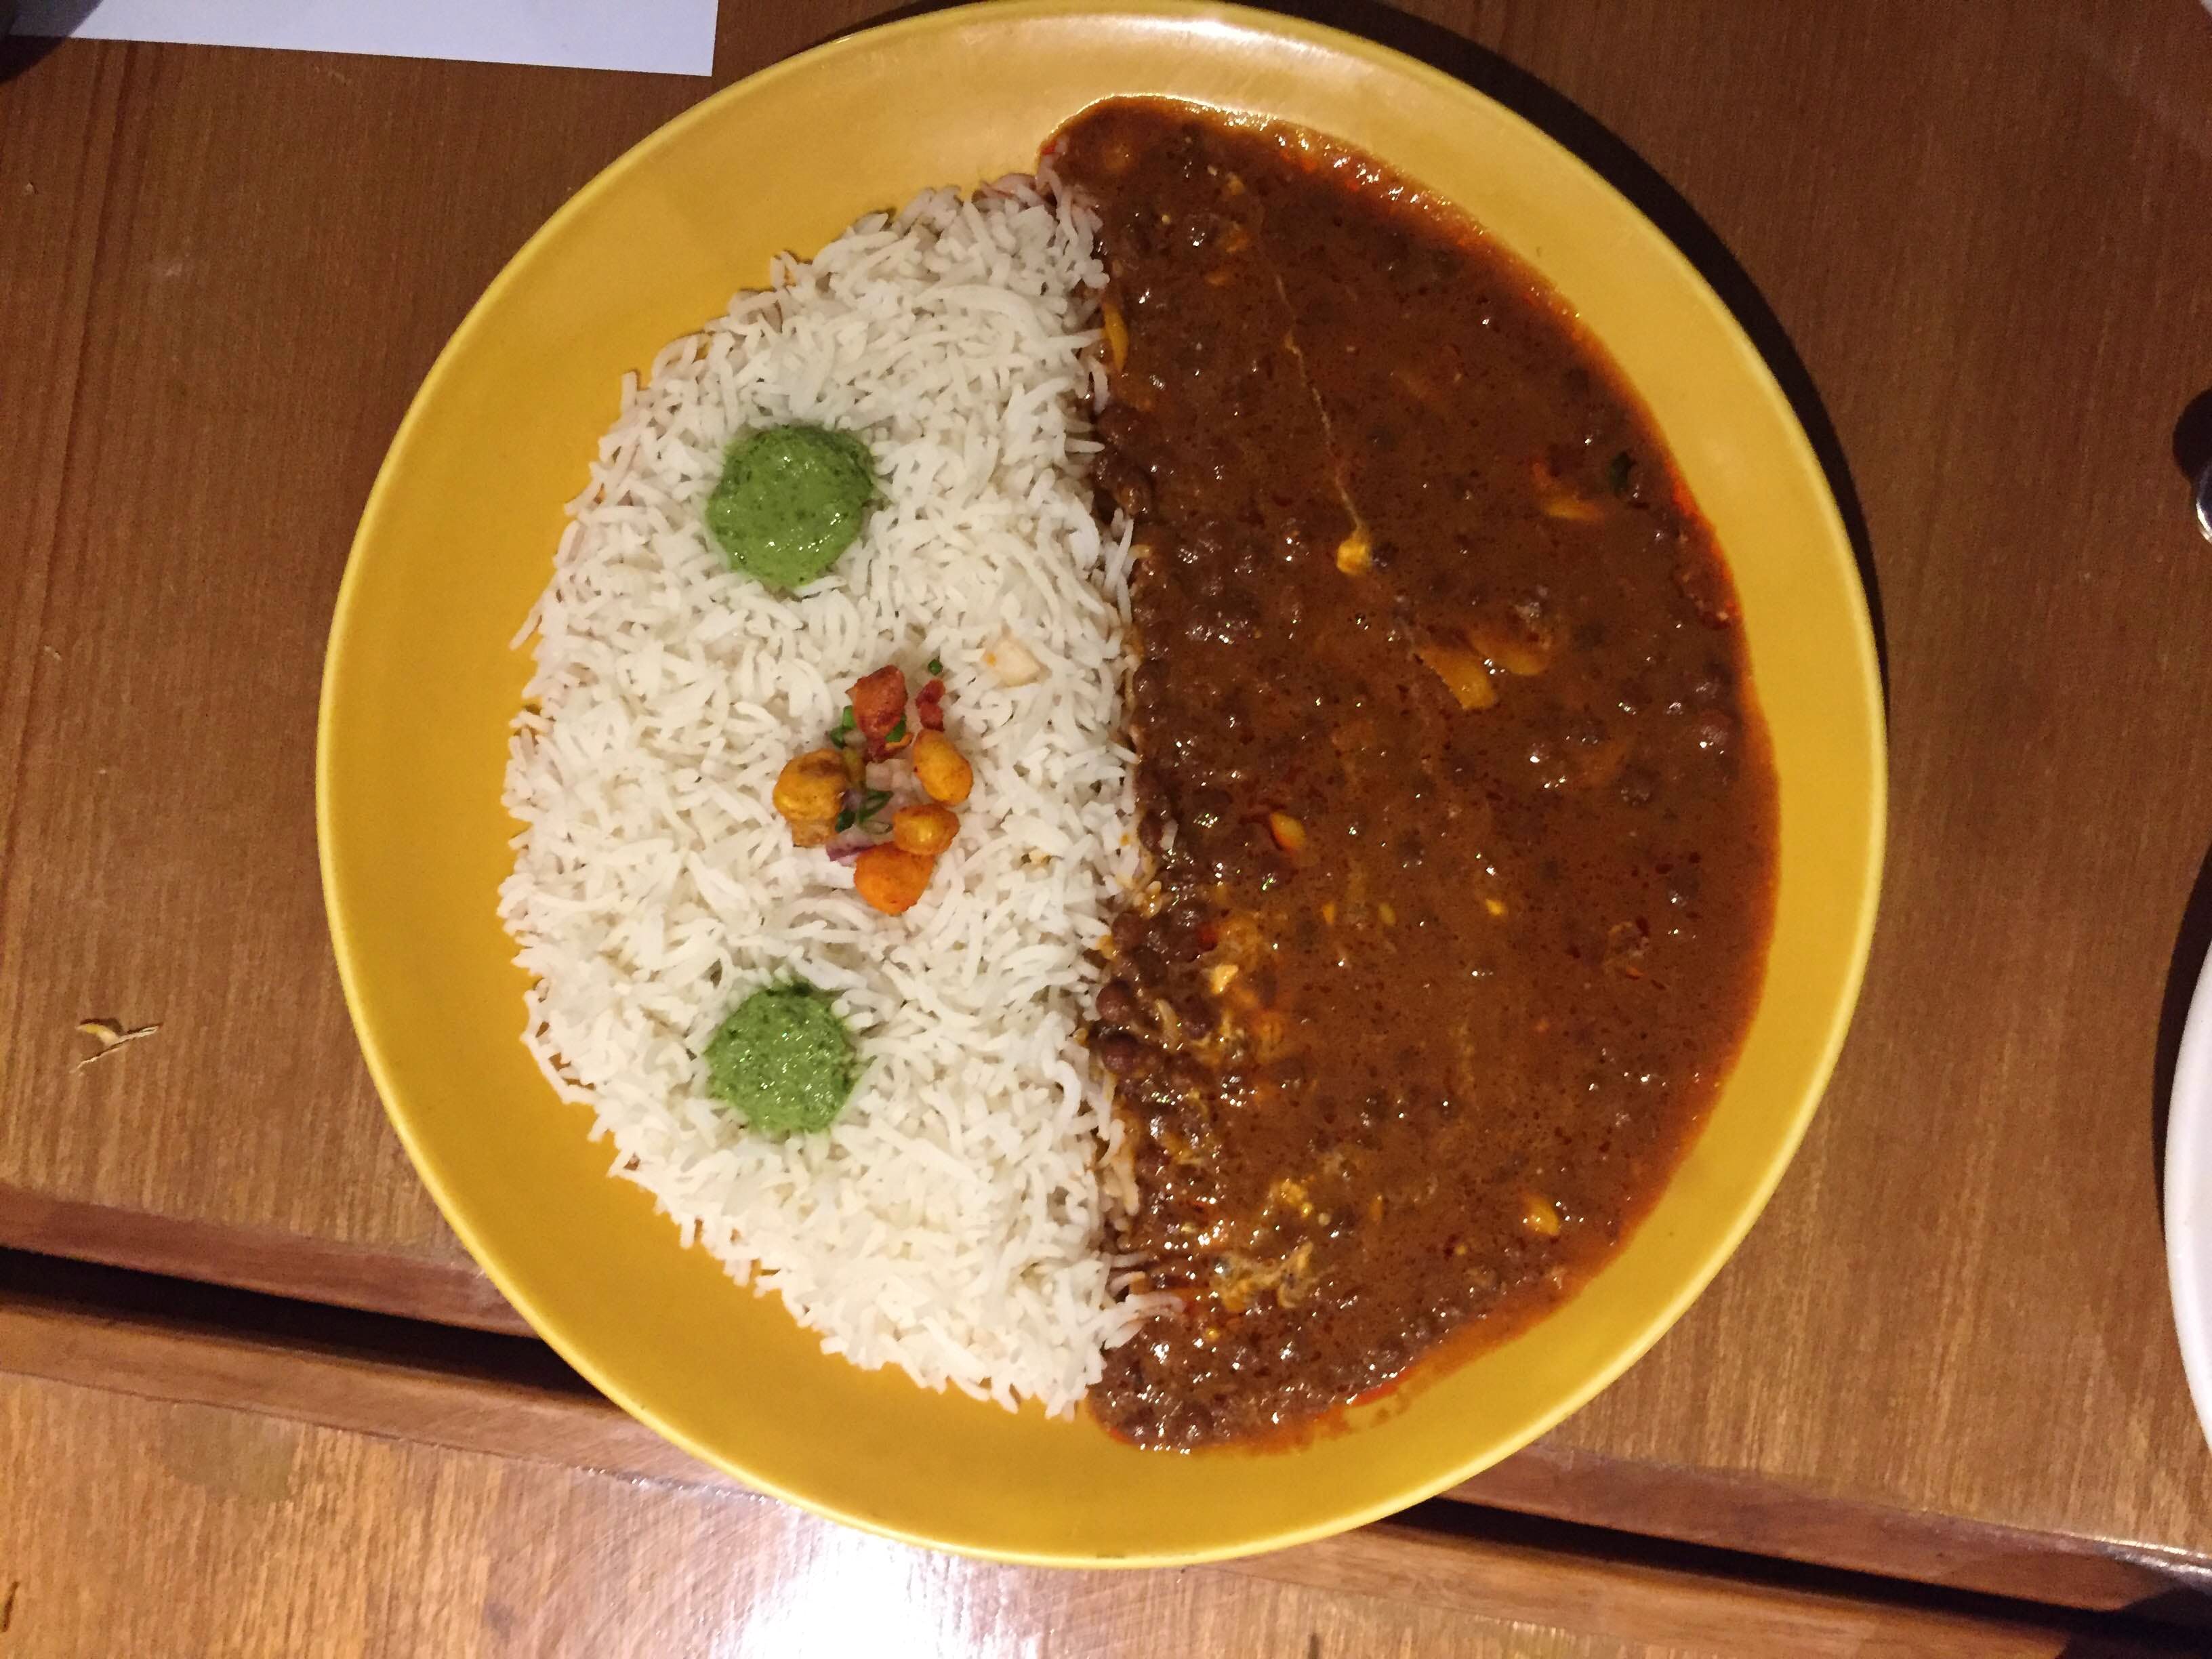 Dish,Food,Cuisine,Ingredient,Curry,Gravy,Indian cuisine,Recipe,Produce,Japanese curry